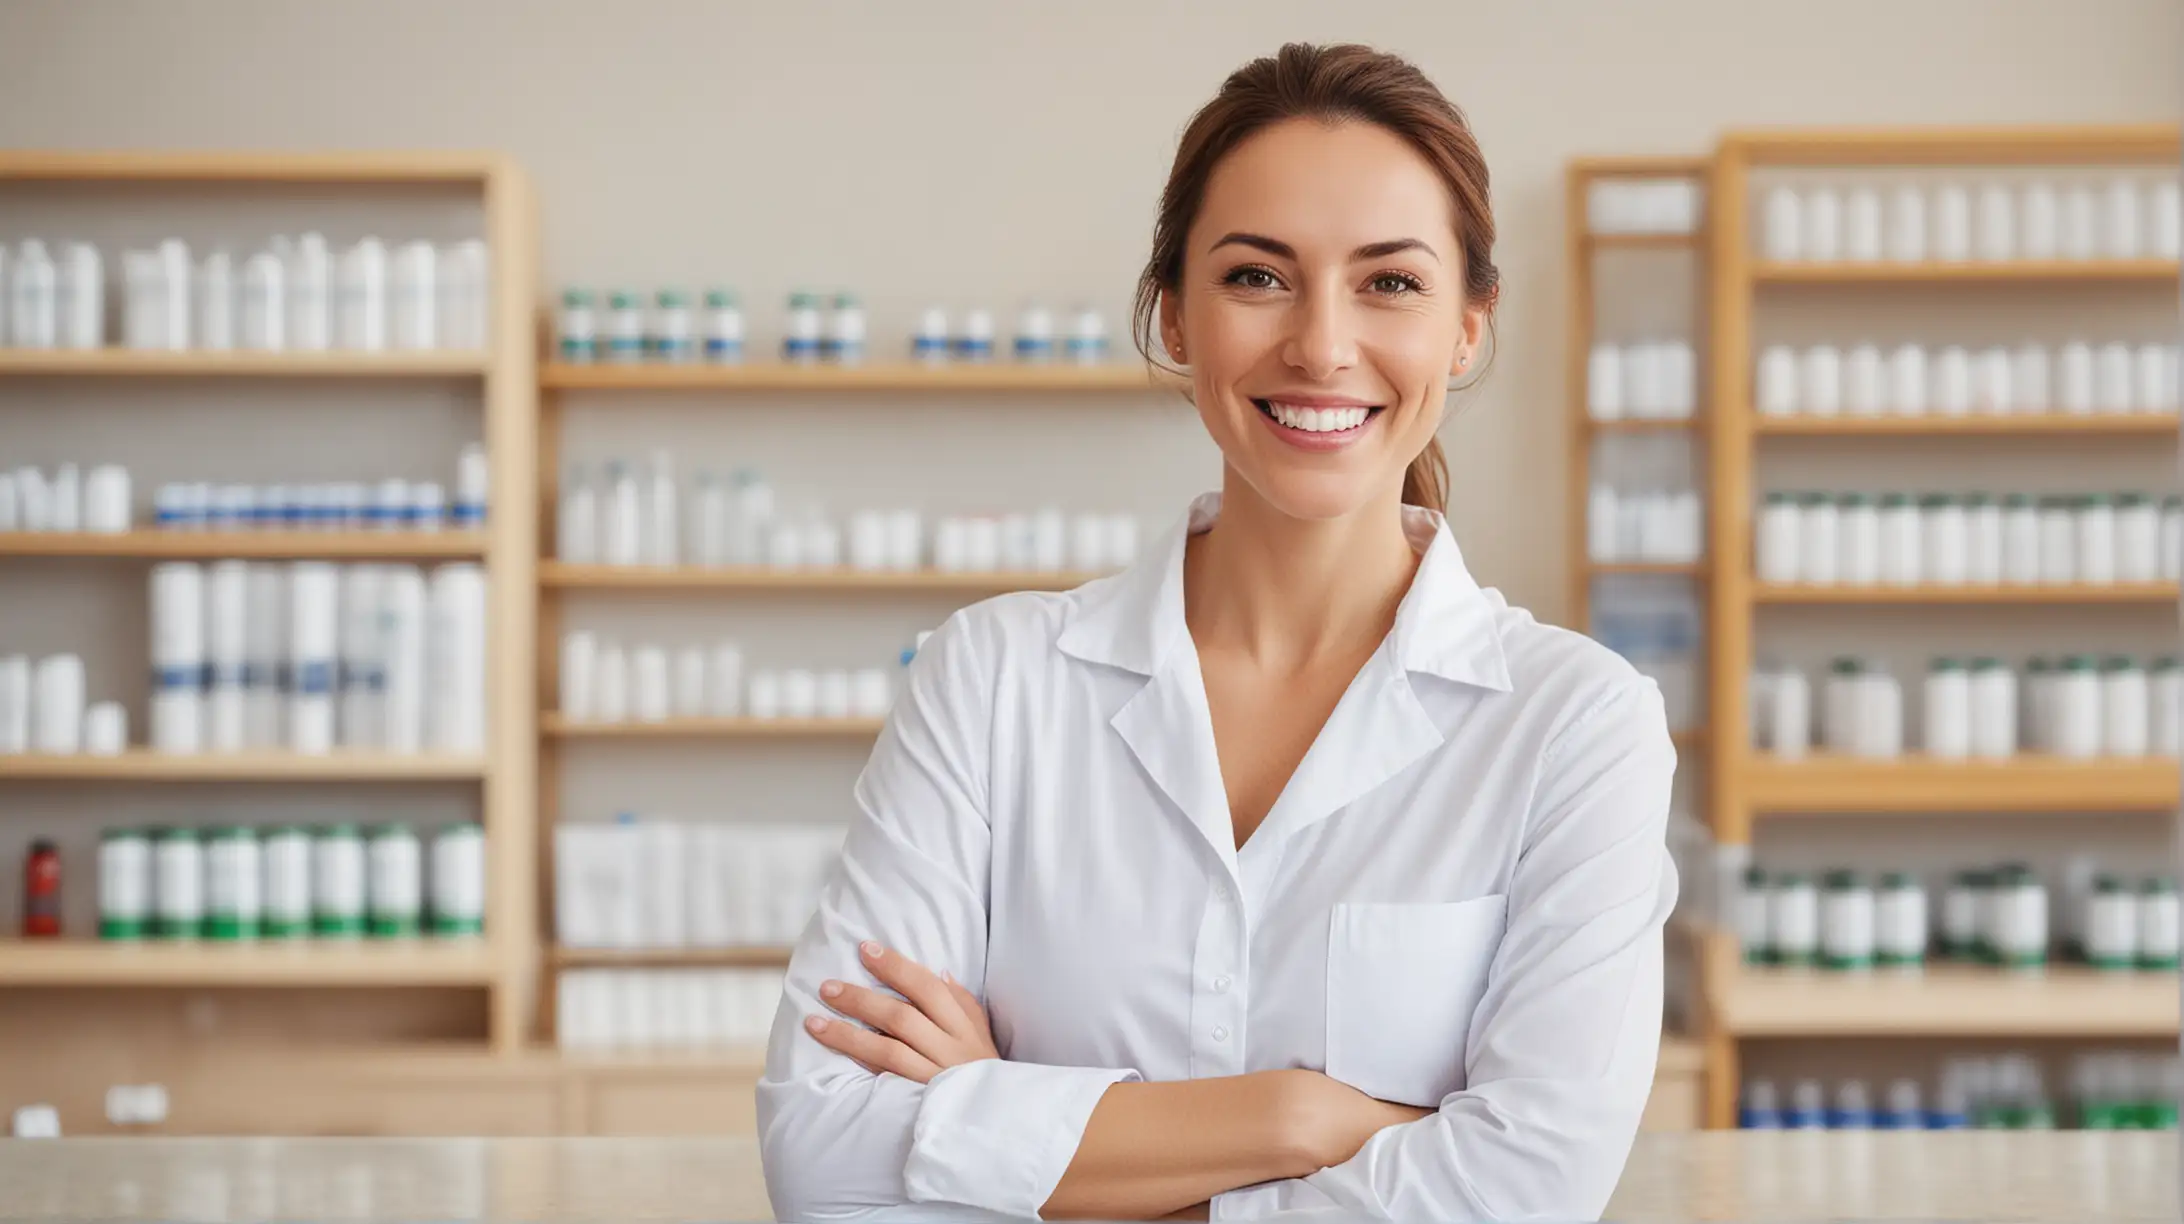 Cheerful Health Professional with Dietary Supplement Bottles